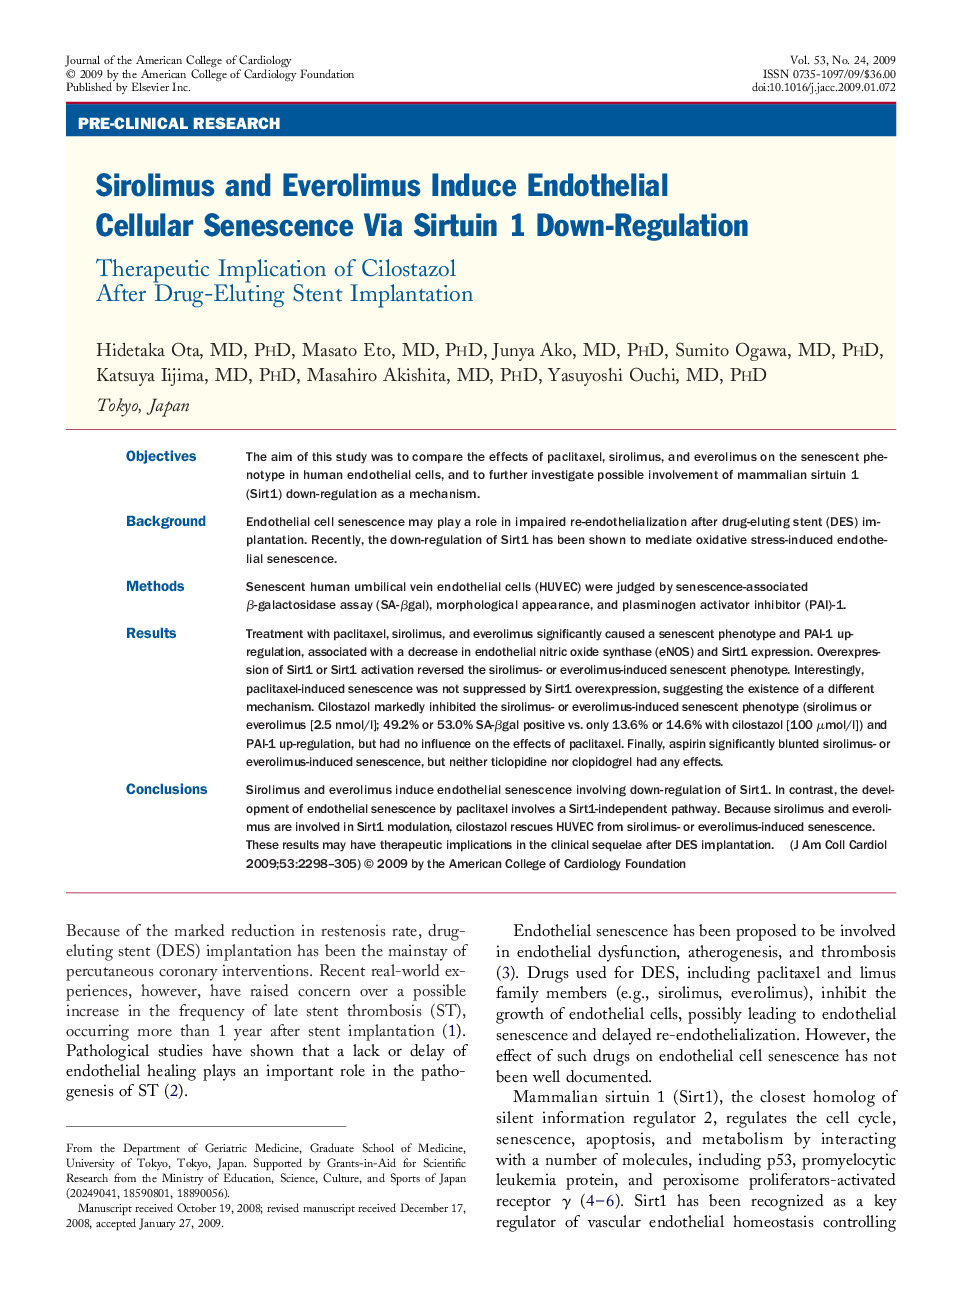 Sirolimus and Everolimus Induce Endothelial Cellular Senescence Via Sirtuin 1 Down-Regulation : Therapeutic Implication of Cilostazol After Drug-Eluting Stent Implantation